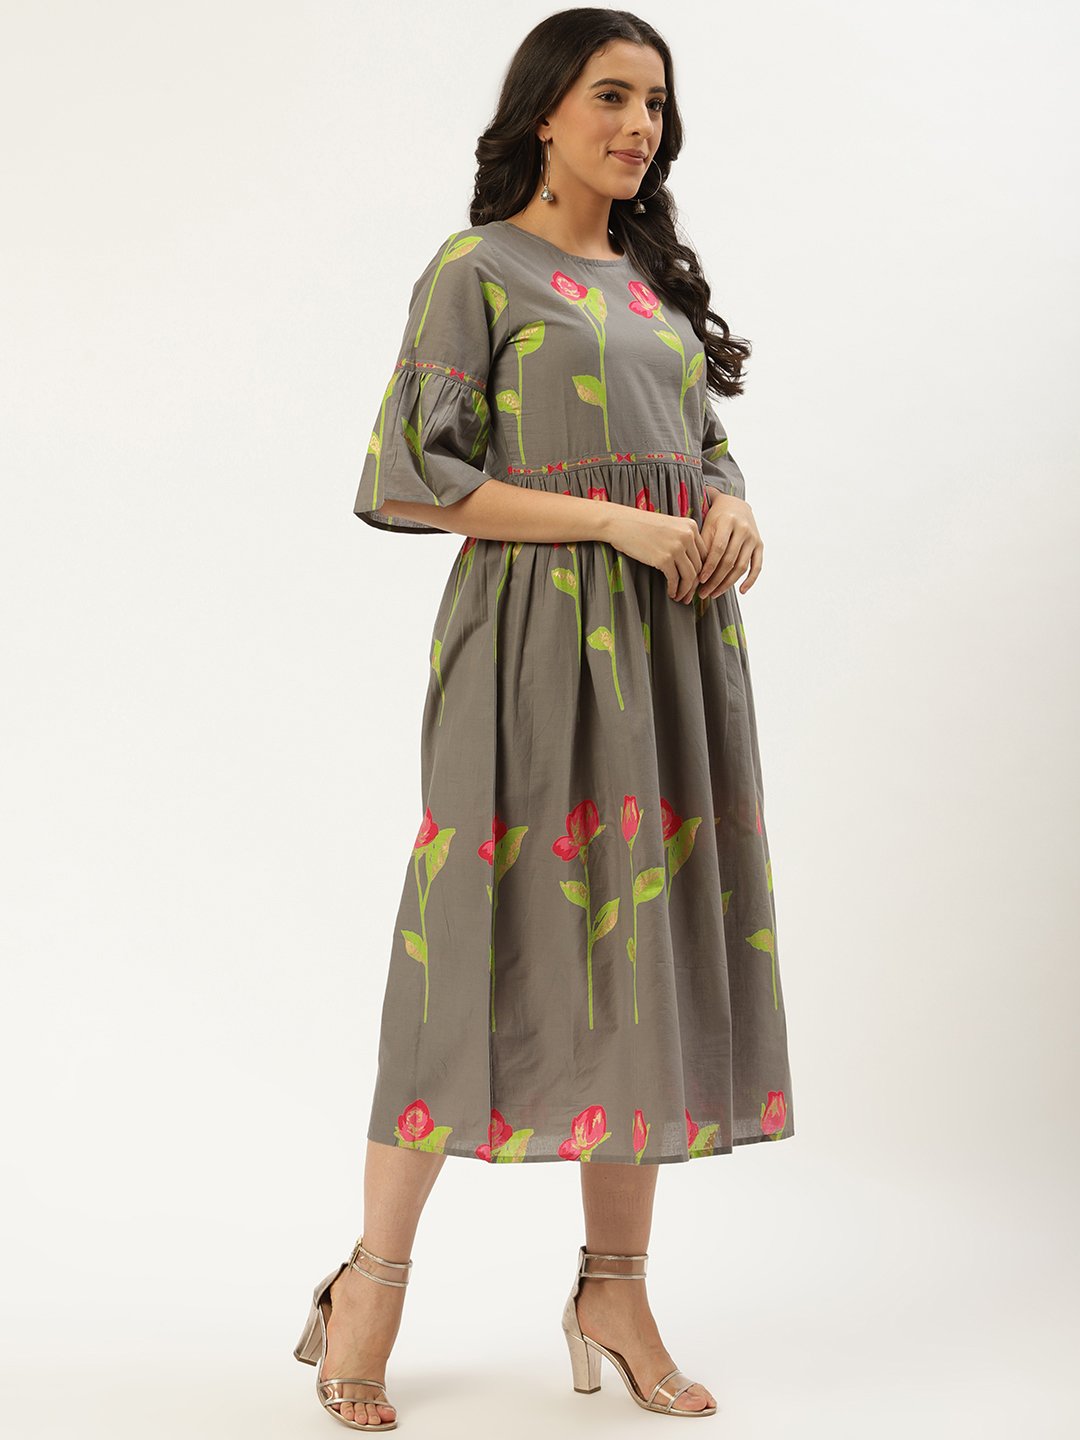 Women's Grey Floral Printed Round Neck Cotton A-Line Dress - Nayo Clothing